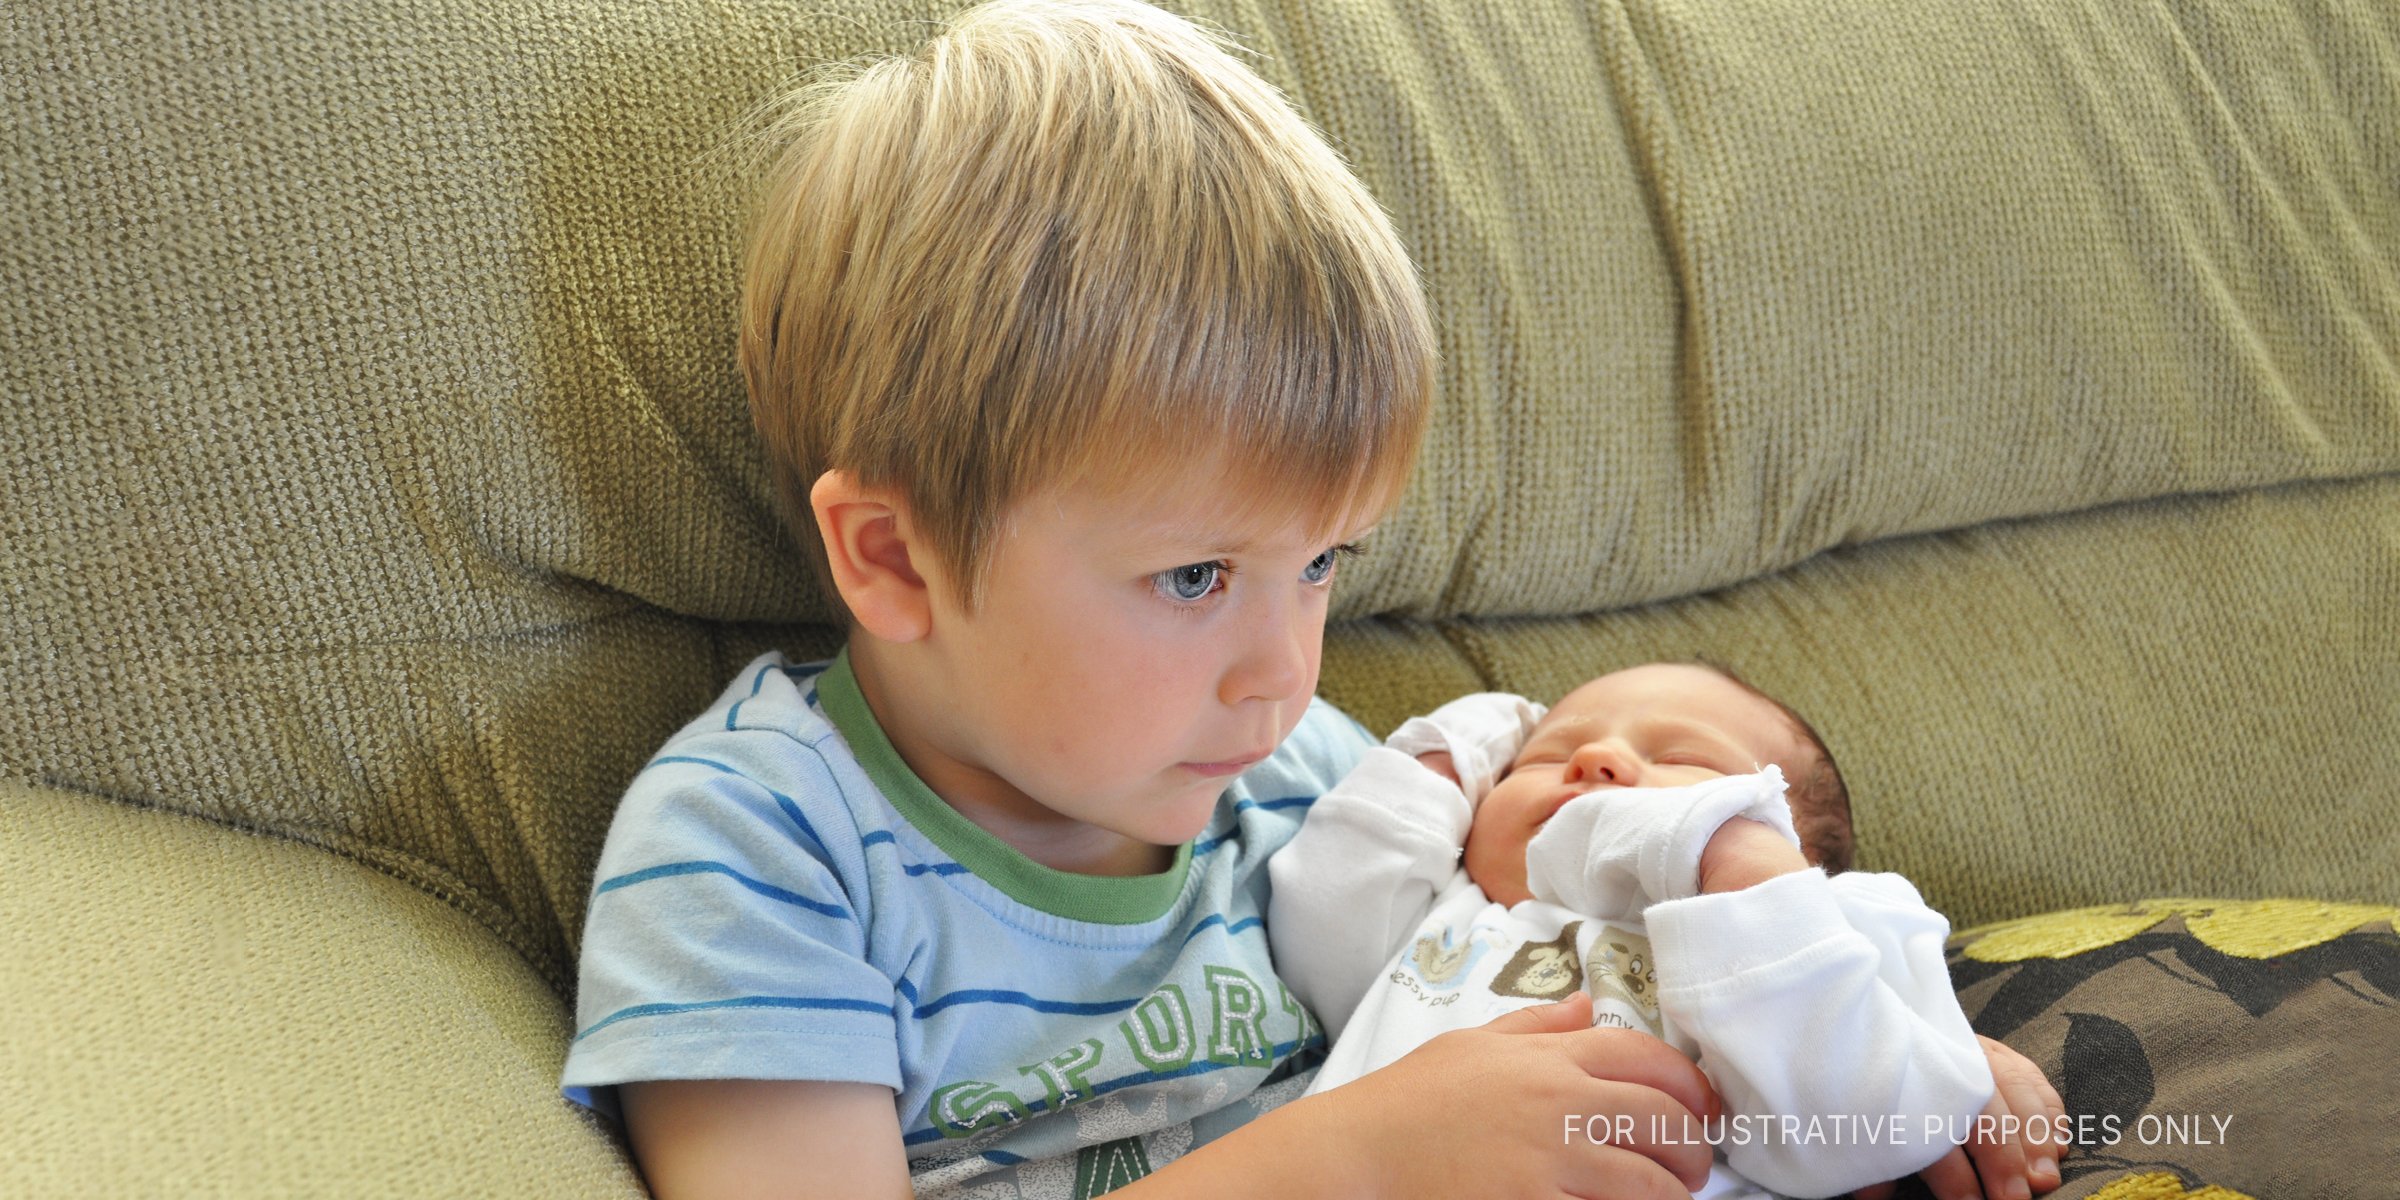 Little Boy Cradling His Baby Sister | Source: Flickr/meemal (CC BY 2.0)